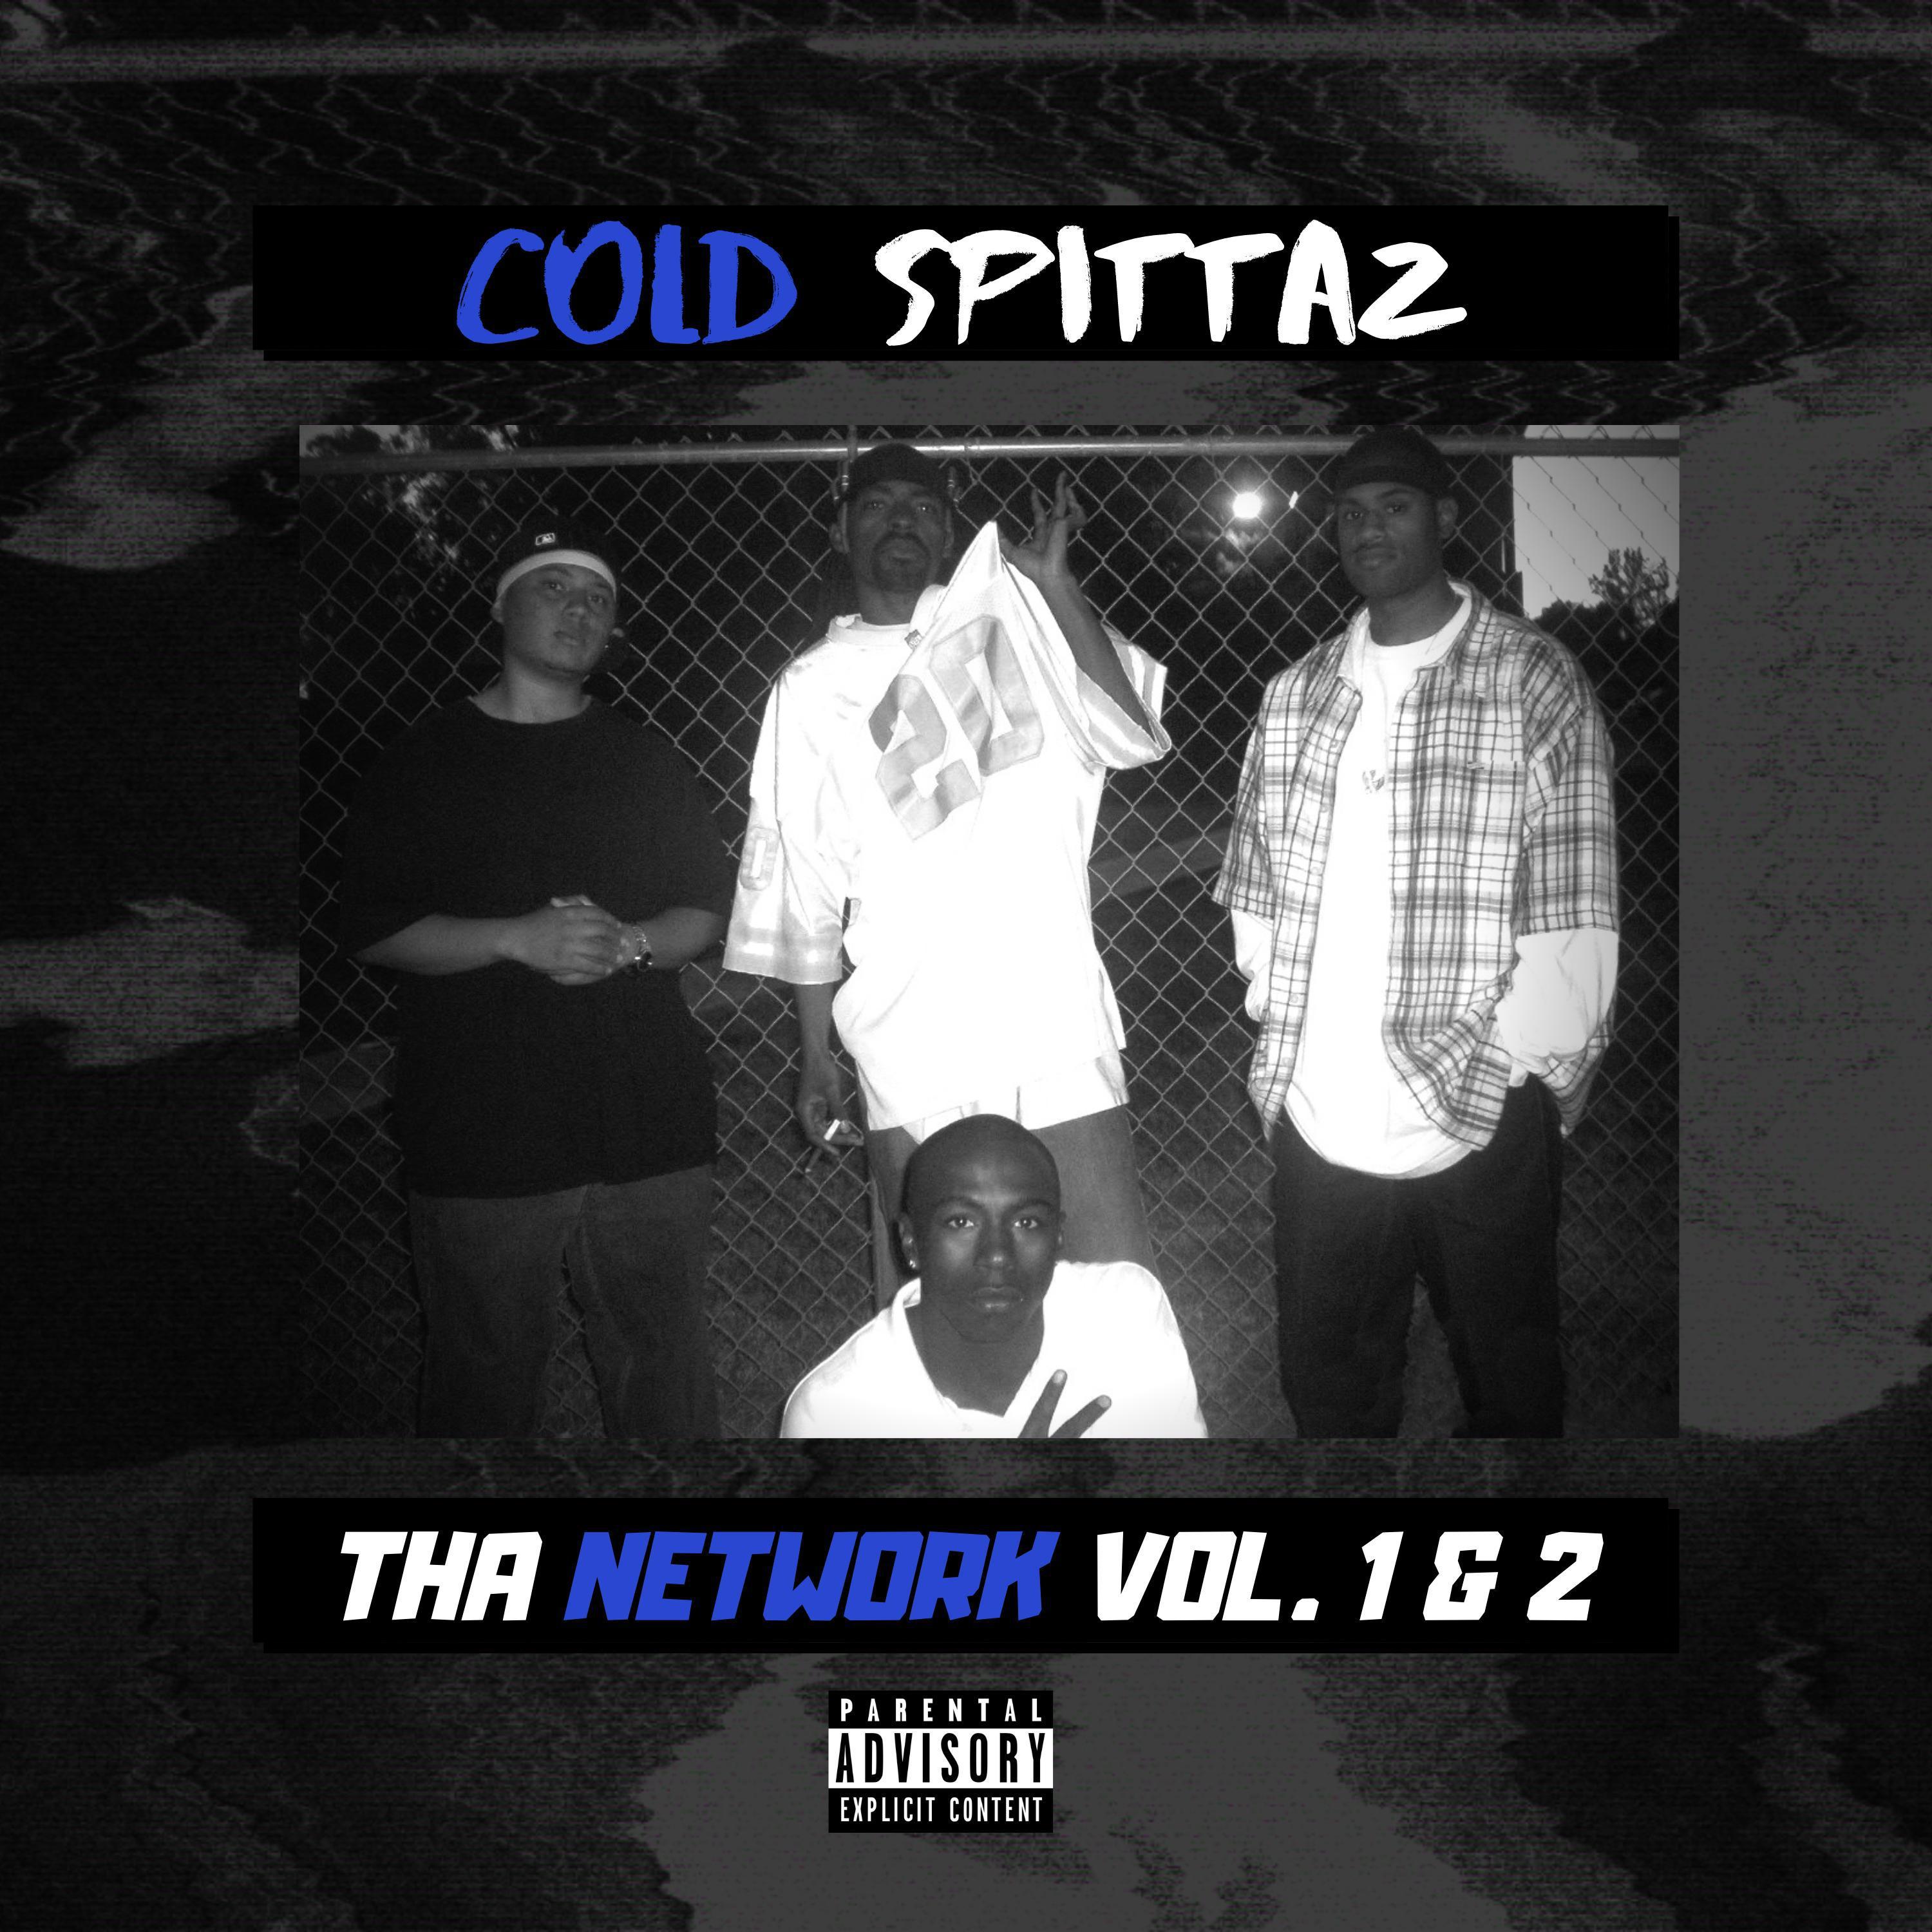 Cold Spittaz - Cold Spittin' (feat. T.I.C. & Trace)